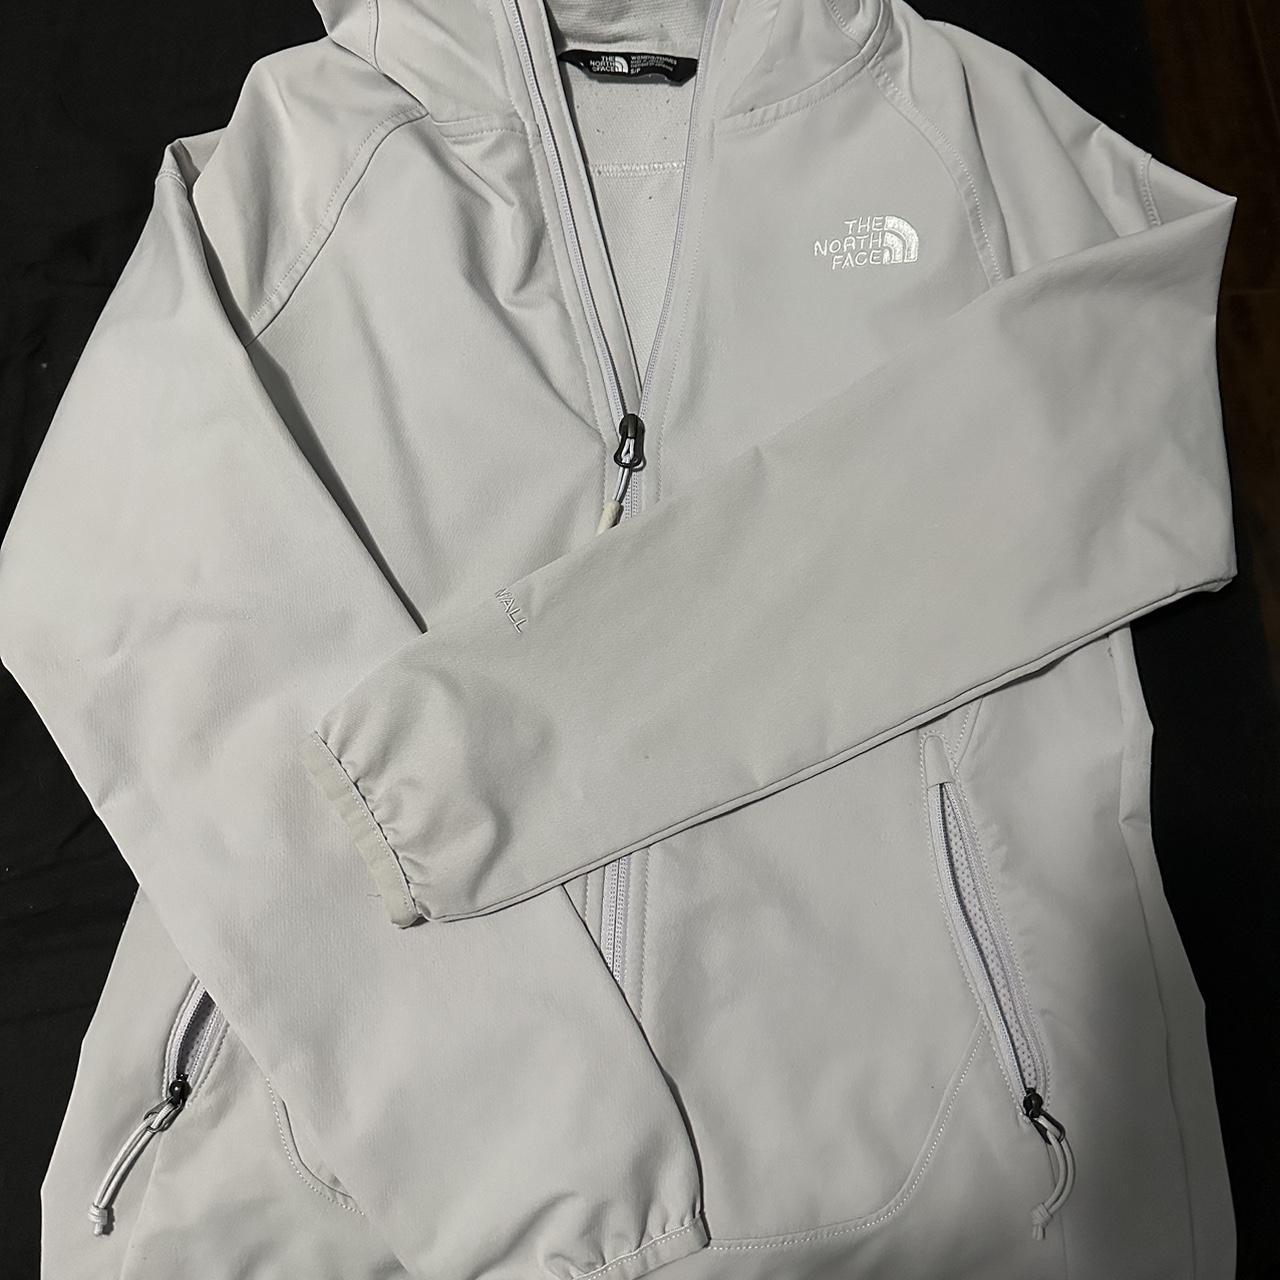 The North Face Women's Jumper